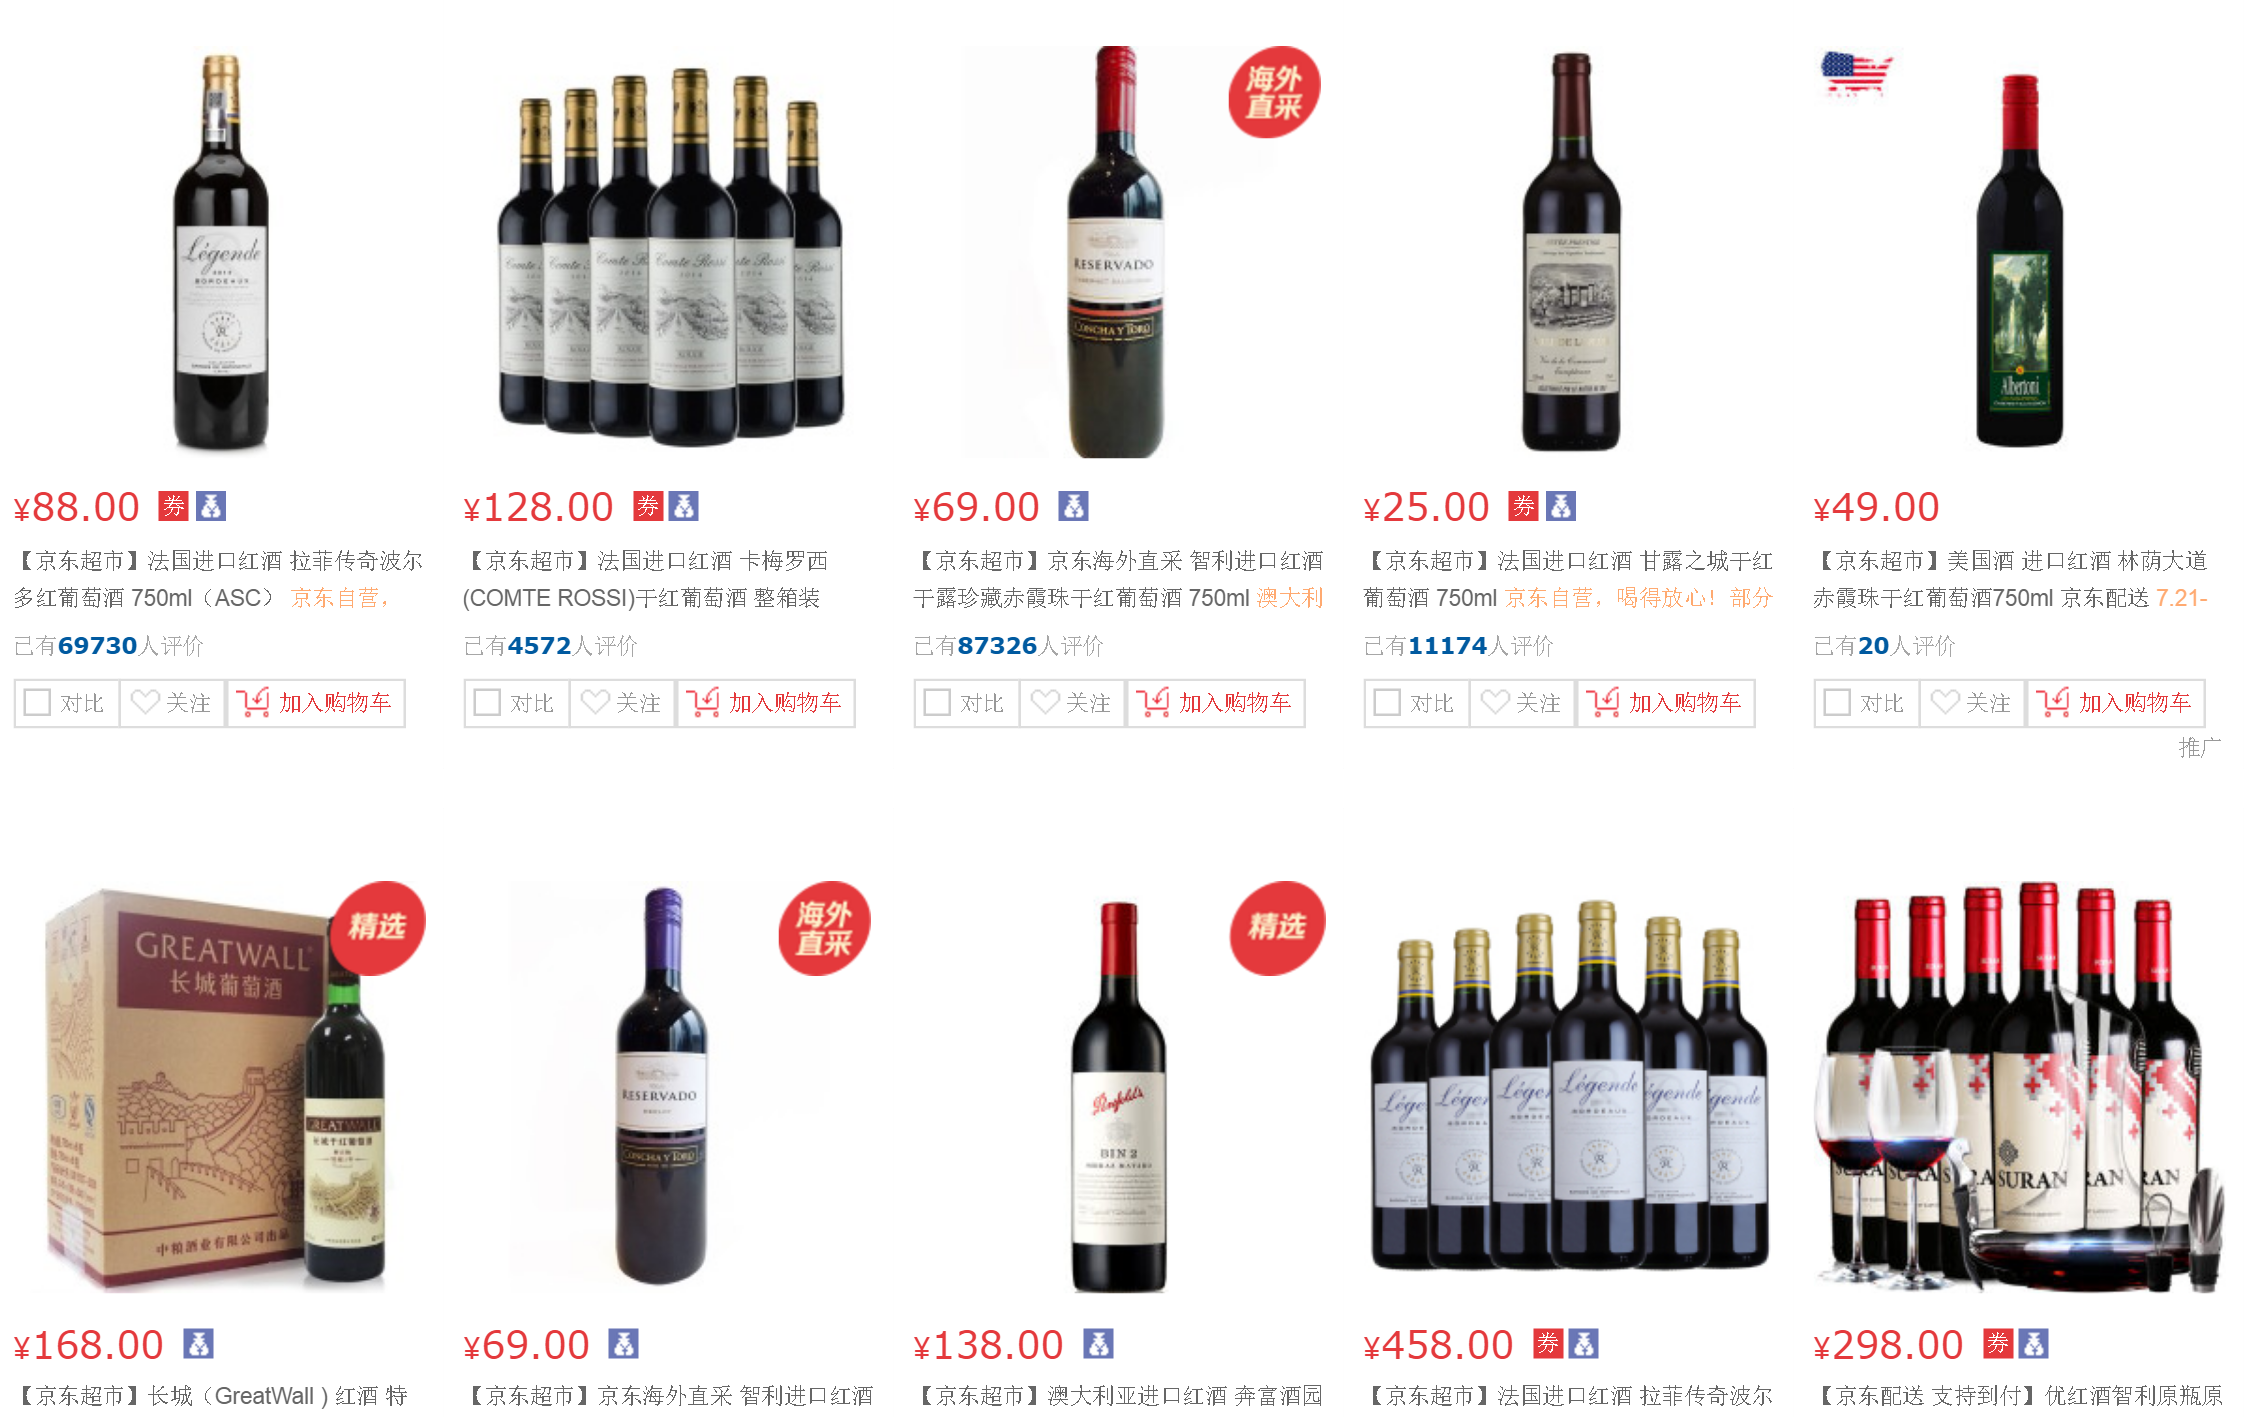 China's Millennials Up Their Wine Consumption as They Buy More Online